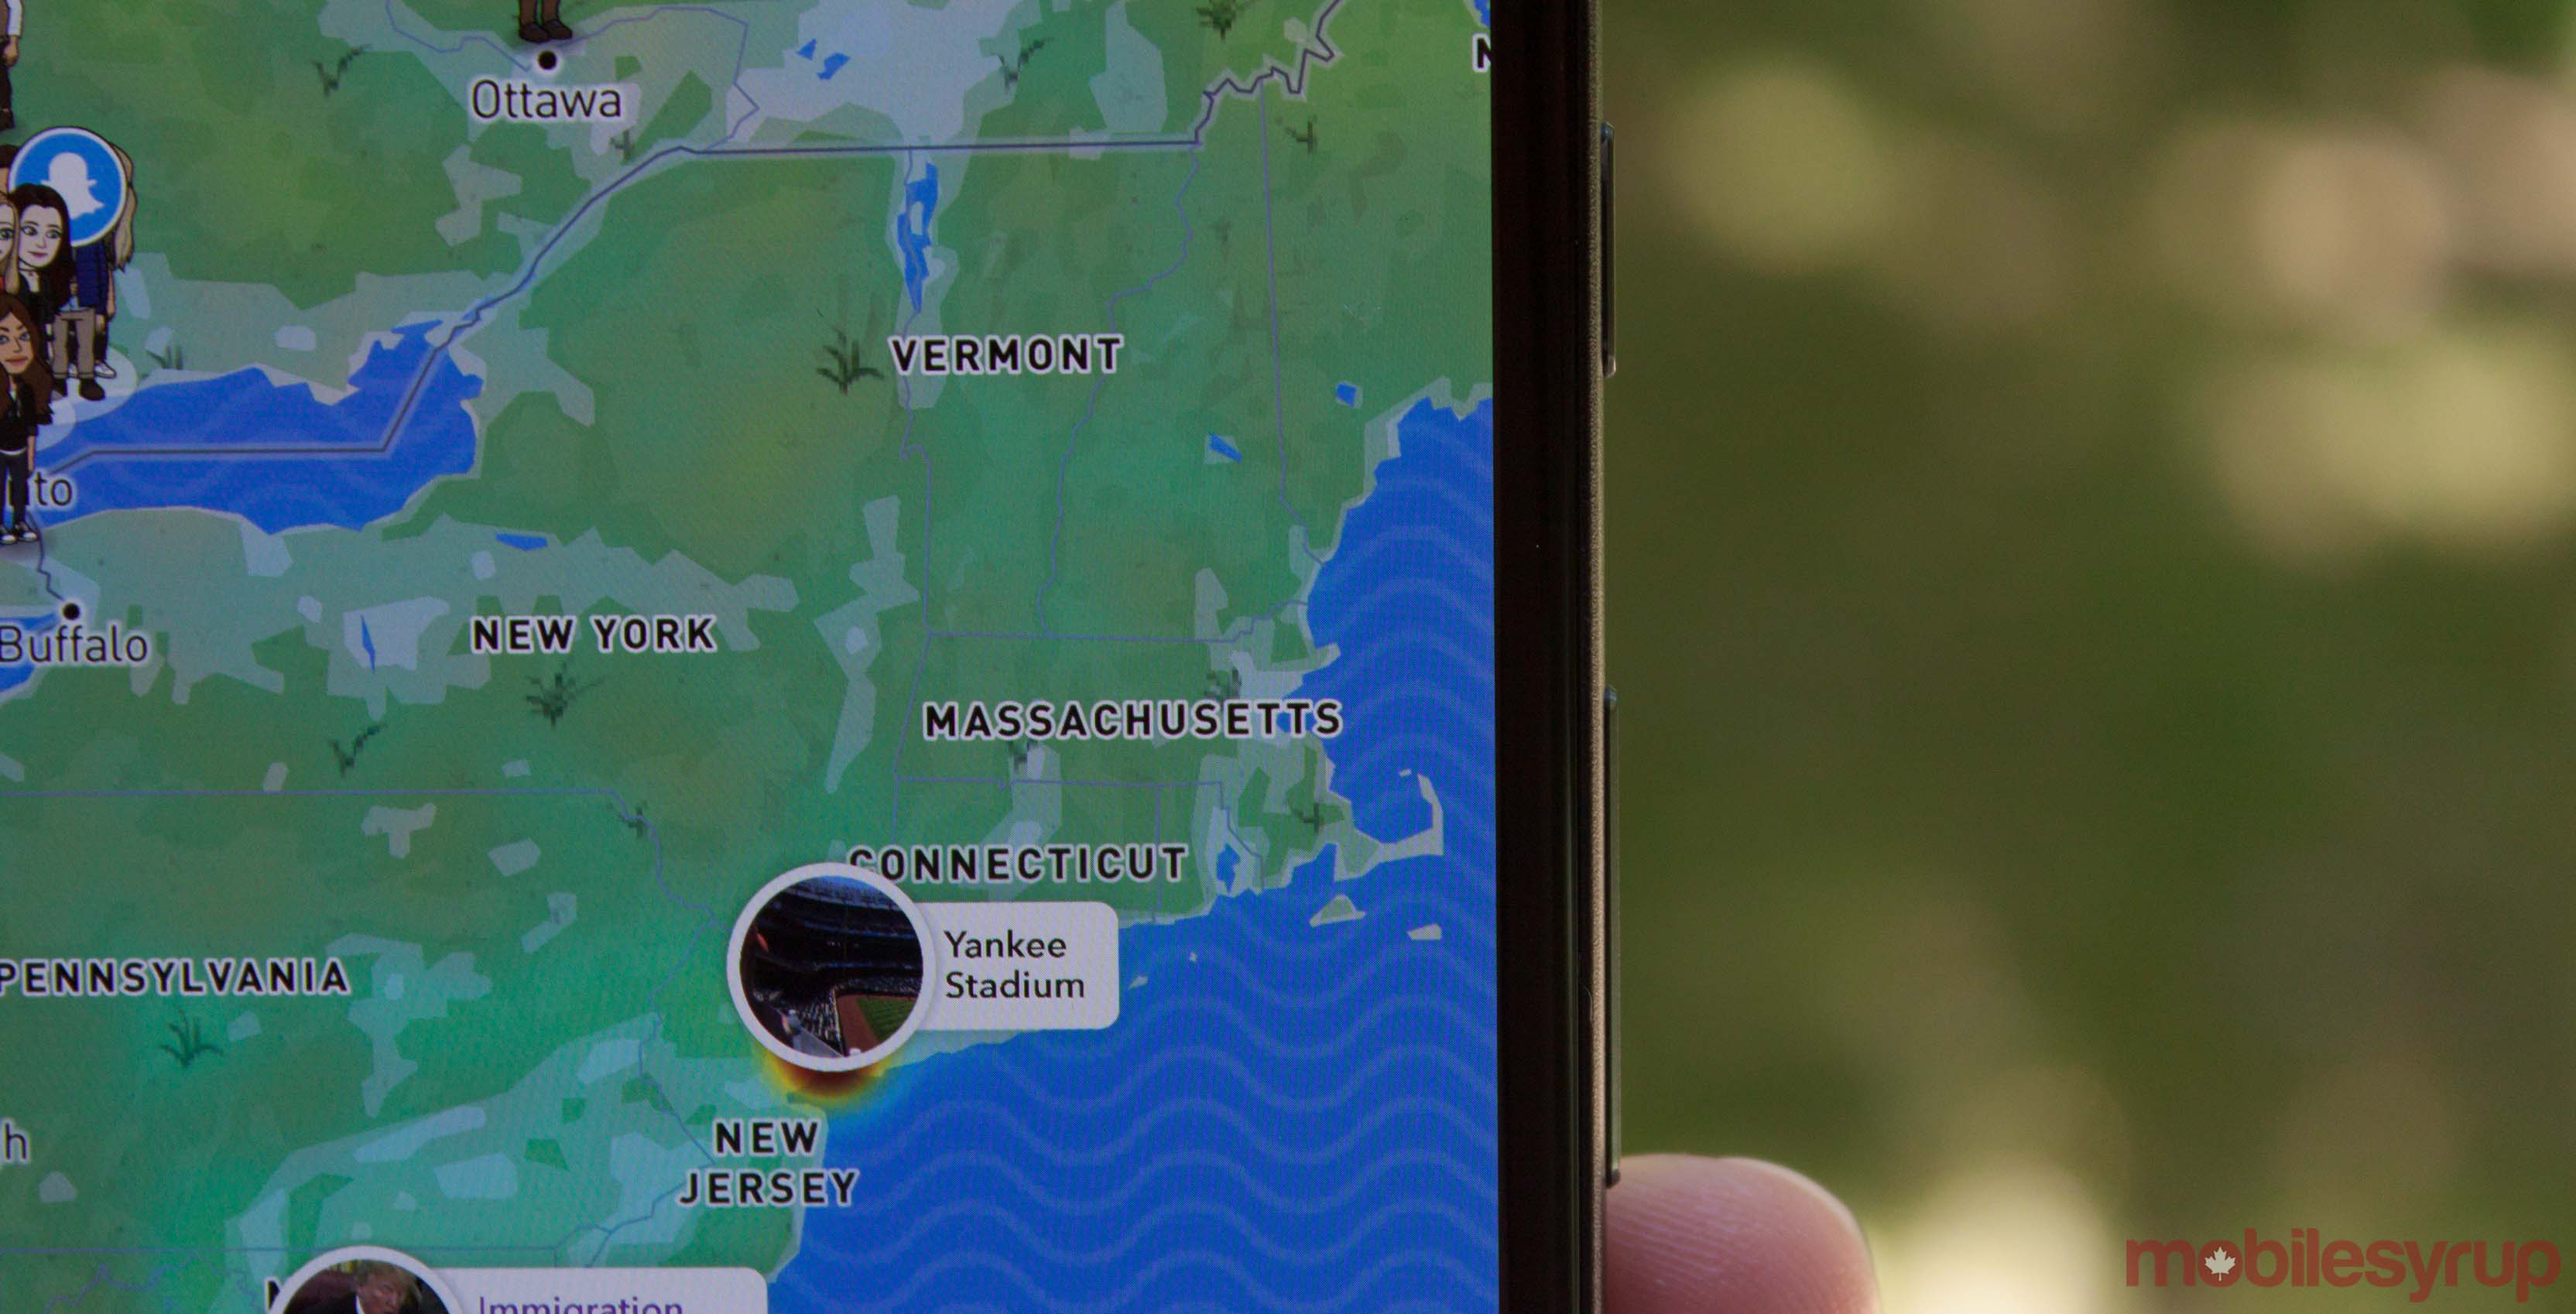 Snapchat's Snap Maps feature